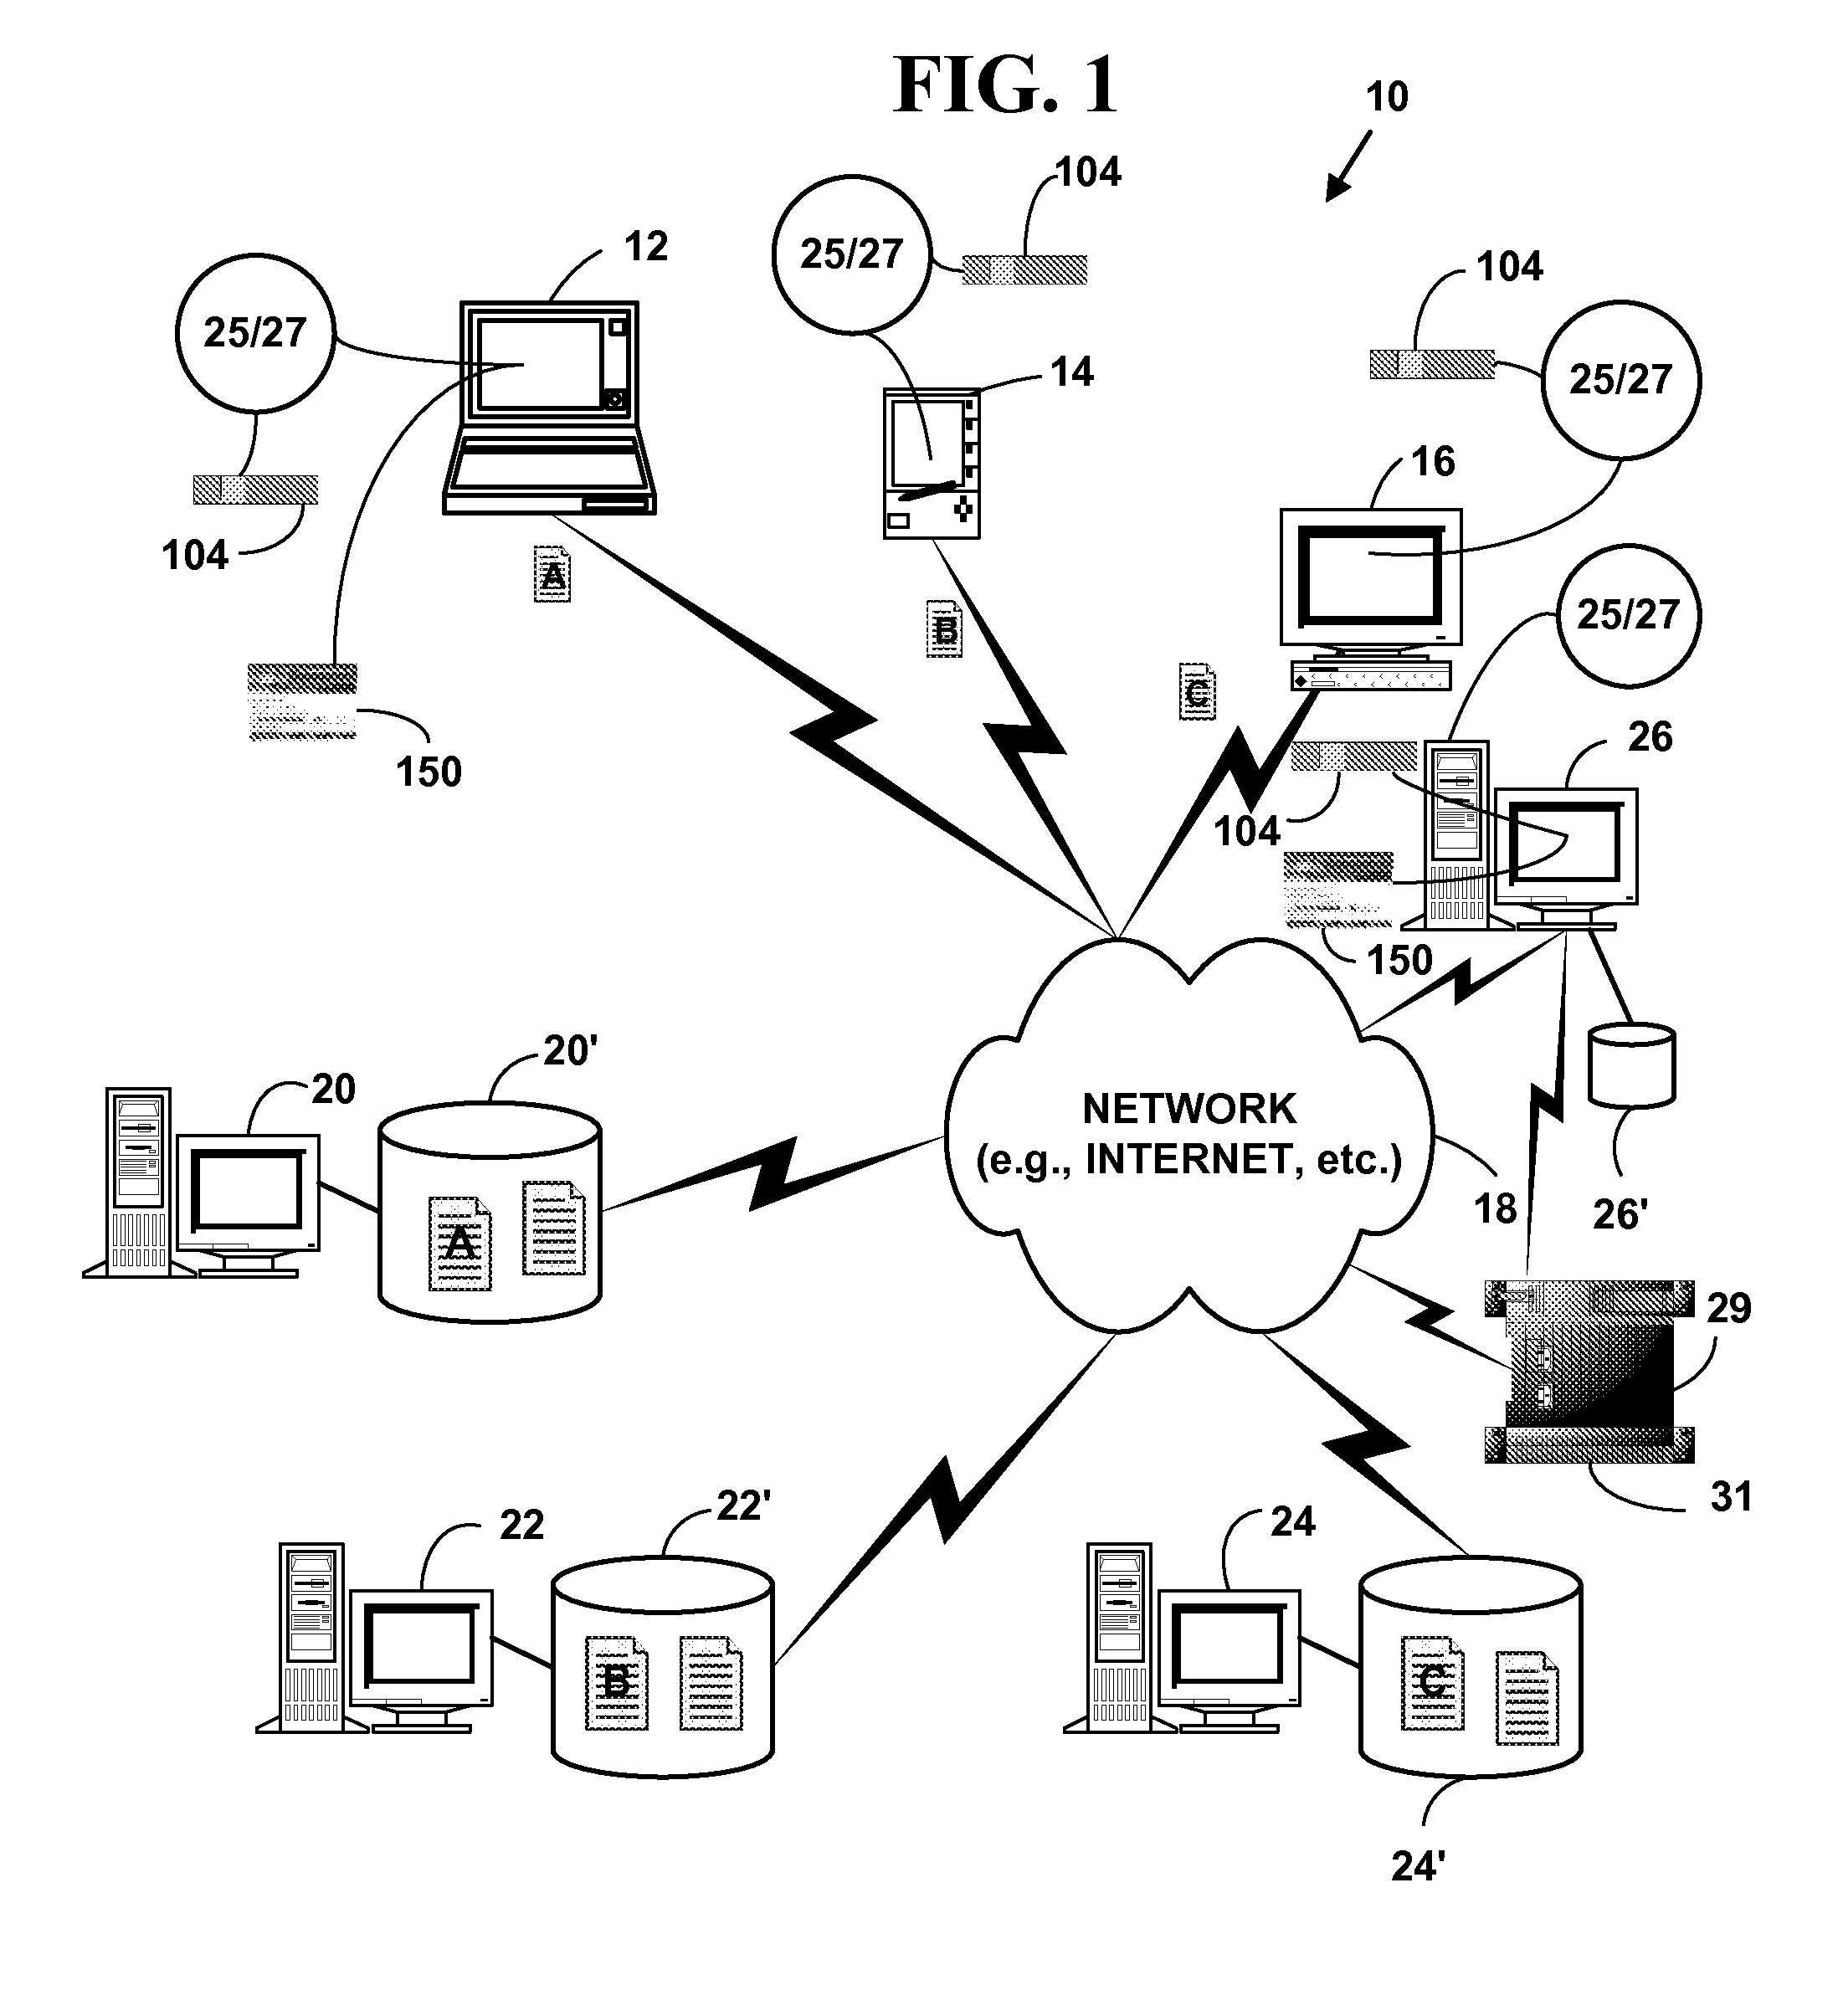 Method and system for providing electronic option trading bandwidth reduction and electronic option risk management and assessment for multi-market electronic trading